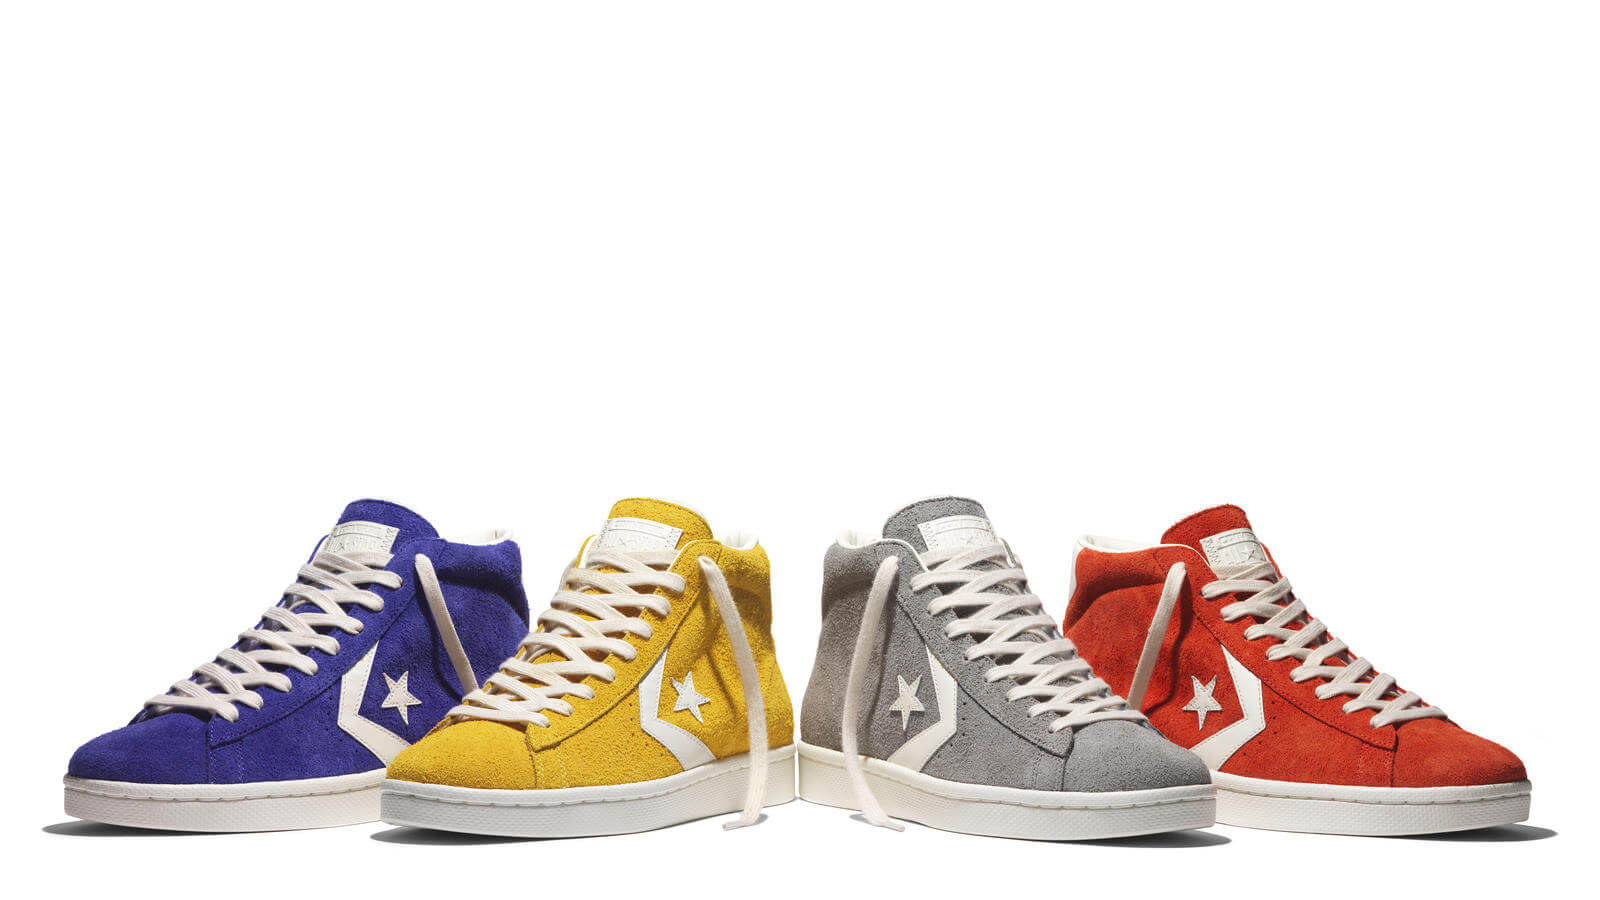 Why the Converse Pro Leather '76 in 